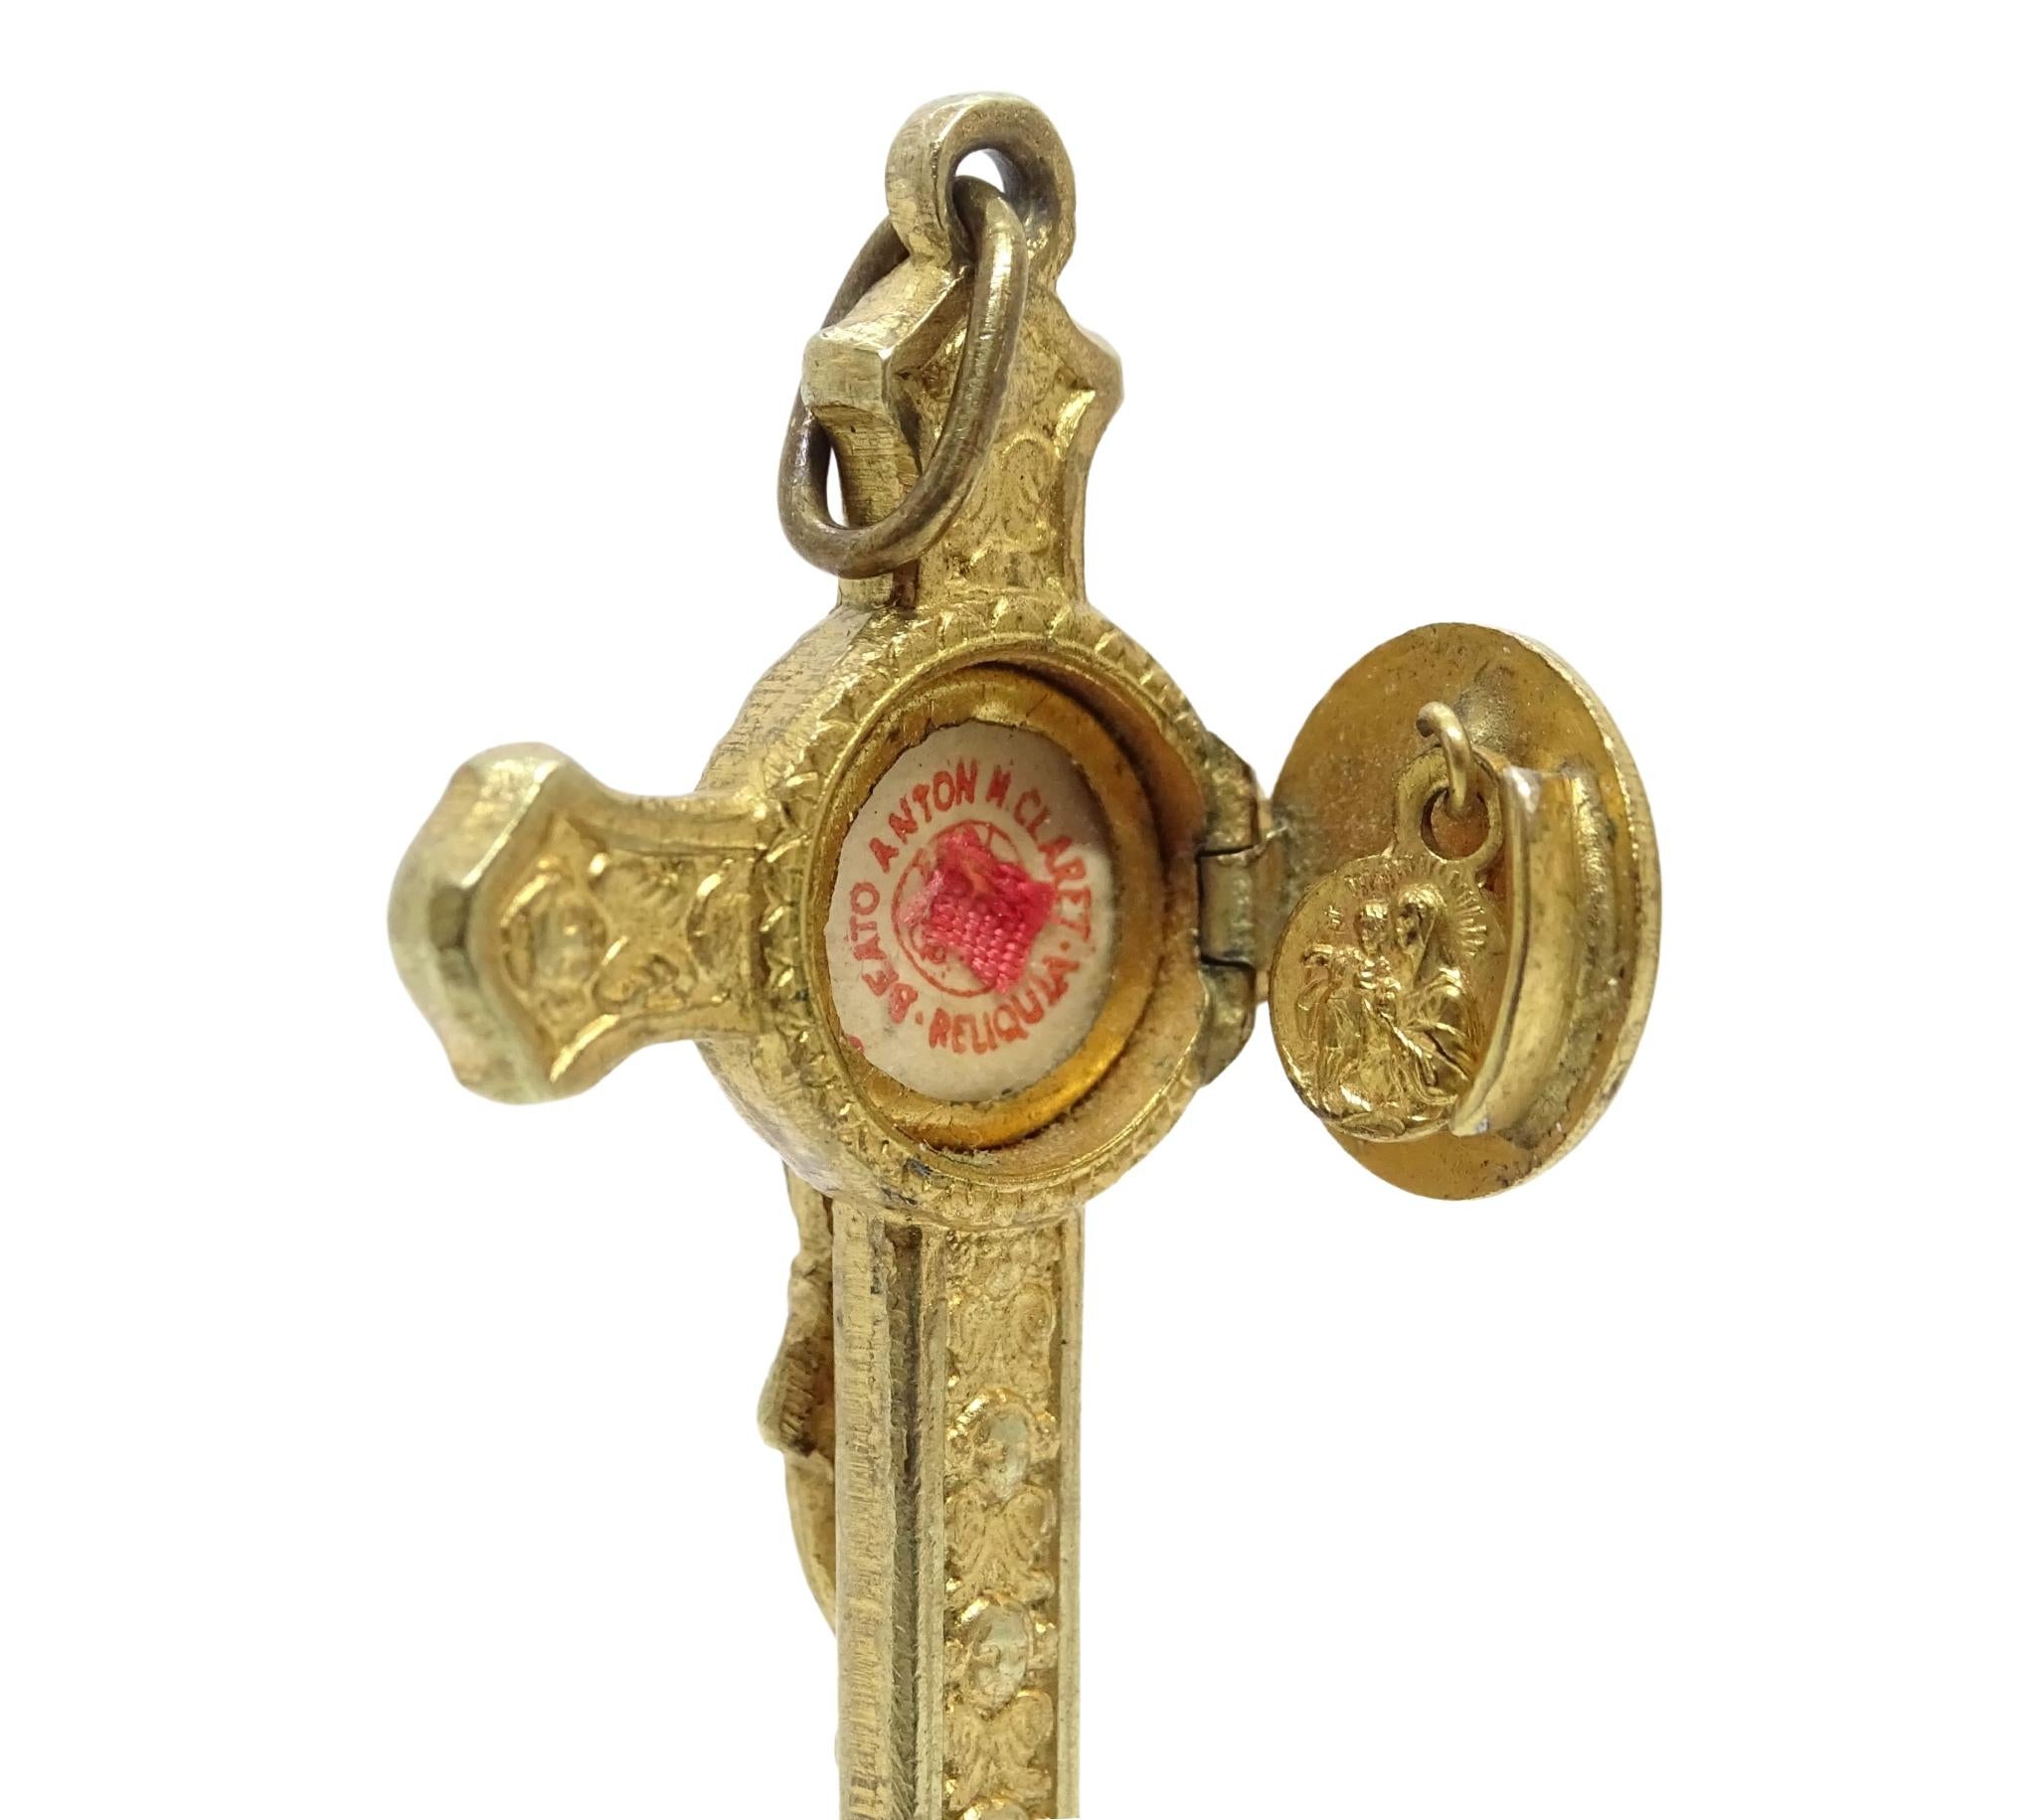 This golden crucifix-shaped reliquary pendant is dedicated to the Catalan Saint Antonio María Claret. This Latin cross with circular finials features a crucified Christ in relief. The arms of the cross are decorated with seraphim, both on the front